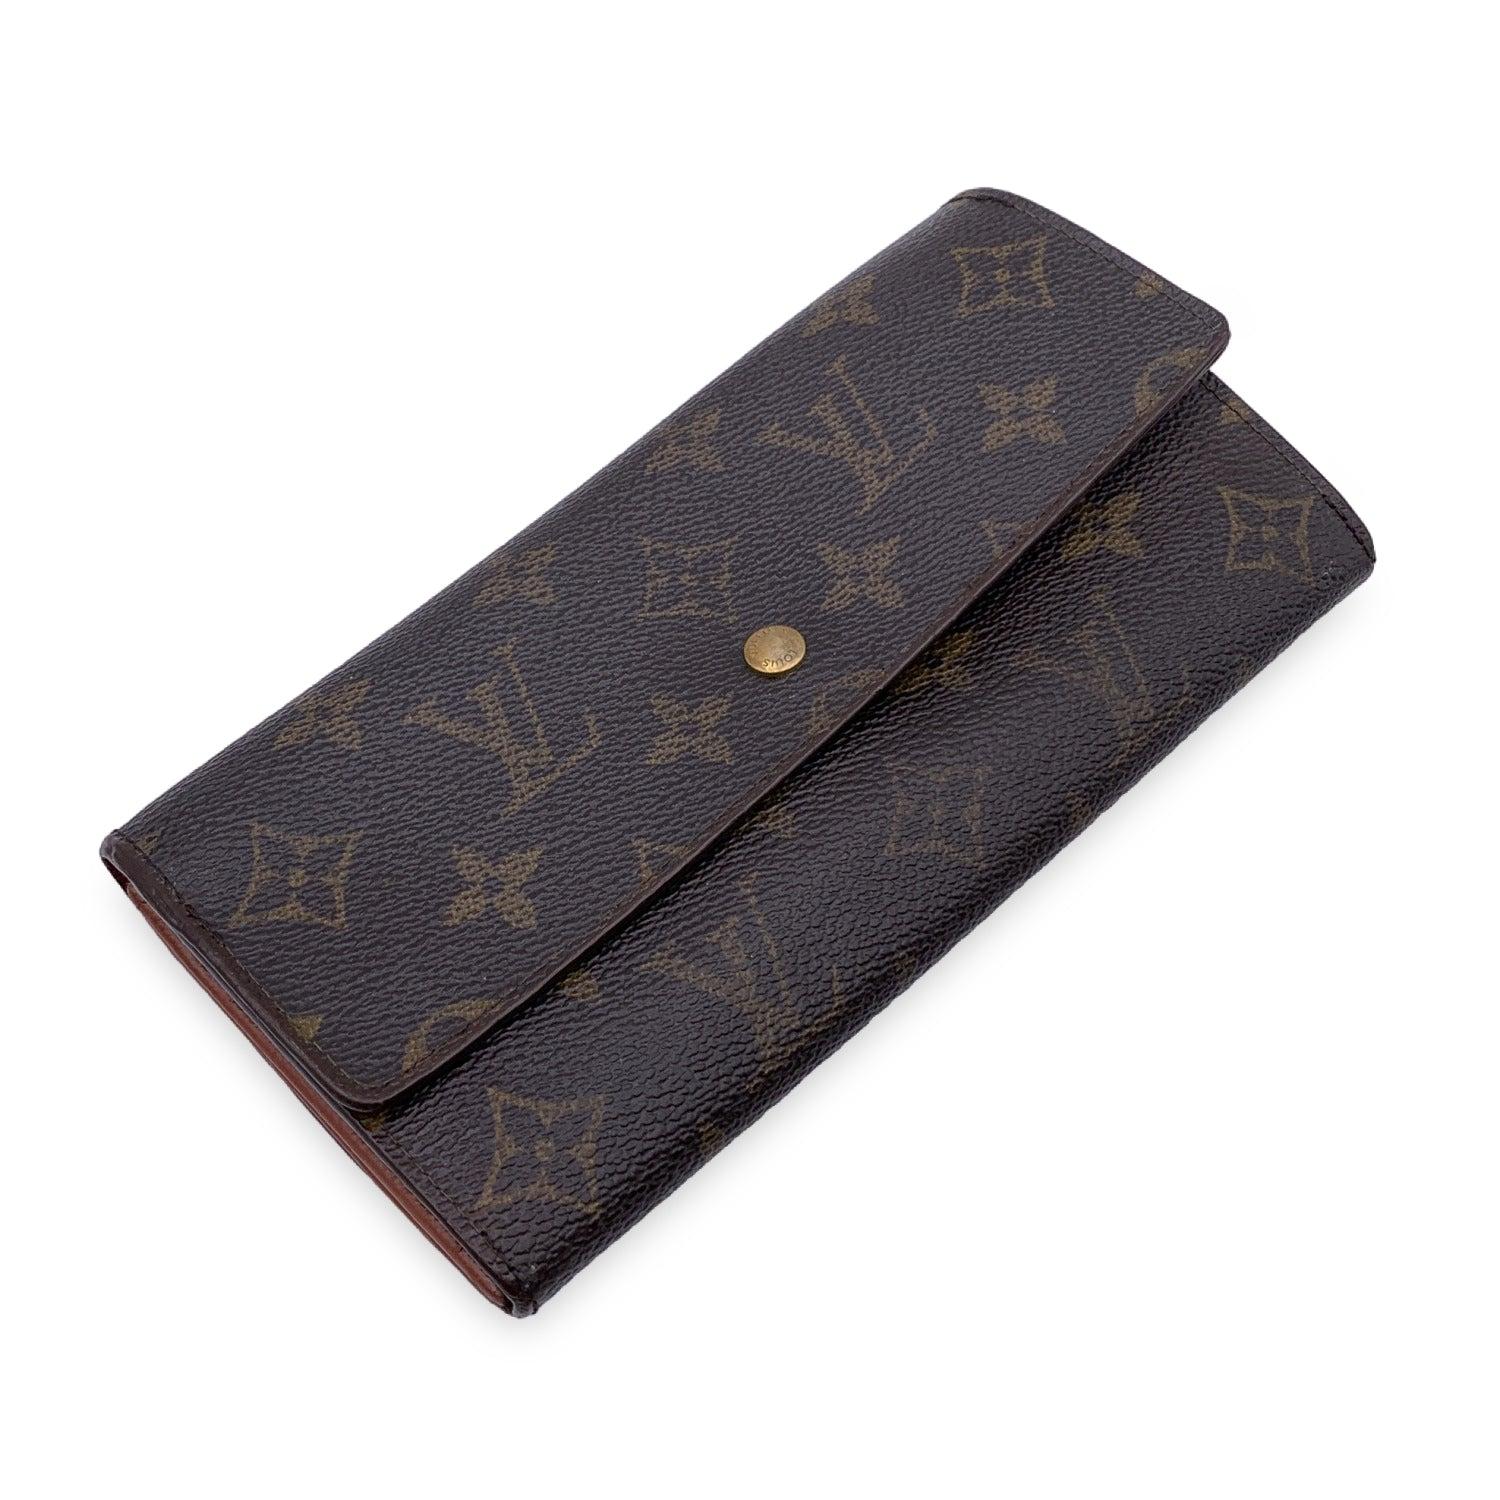 Louis Vuitton 'Sarah' wallet, in brown monogram canvas. Interior fully lined in leather. Flap with snap closure. 1 coin compartment with zip closure. 2 bill compartments. 'LOUIS VUITTON Paris - Made in France' engraved on leather inside,